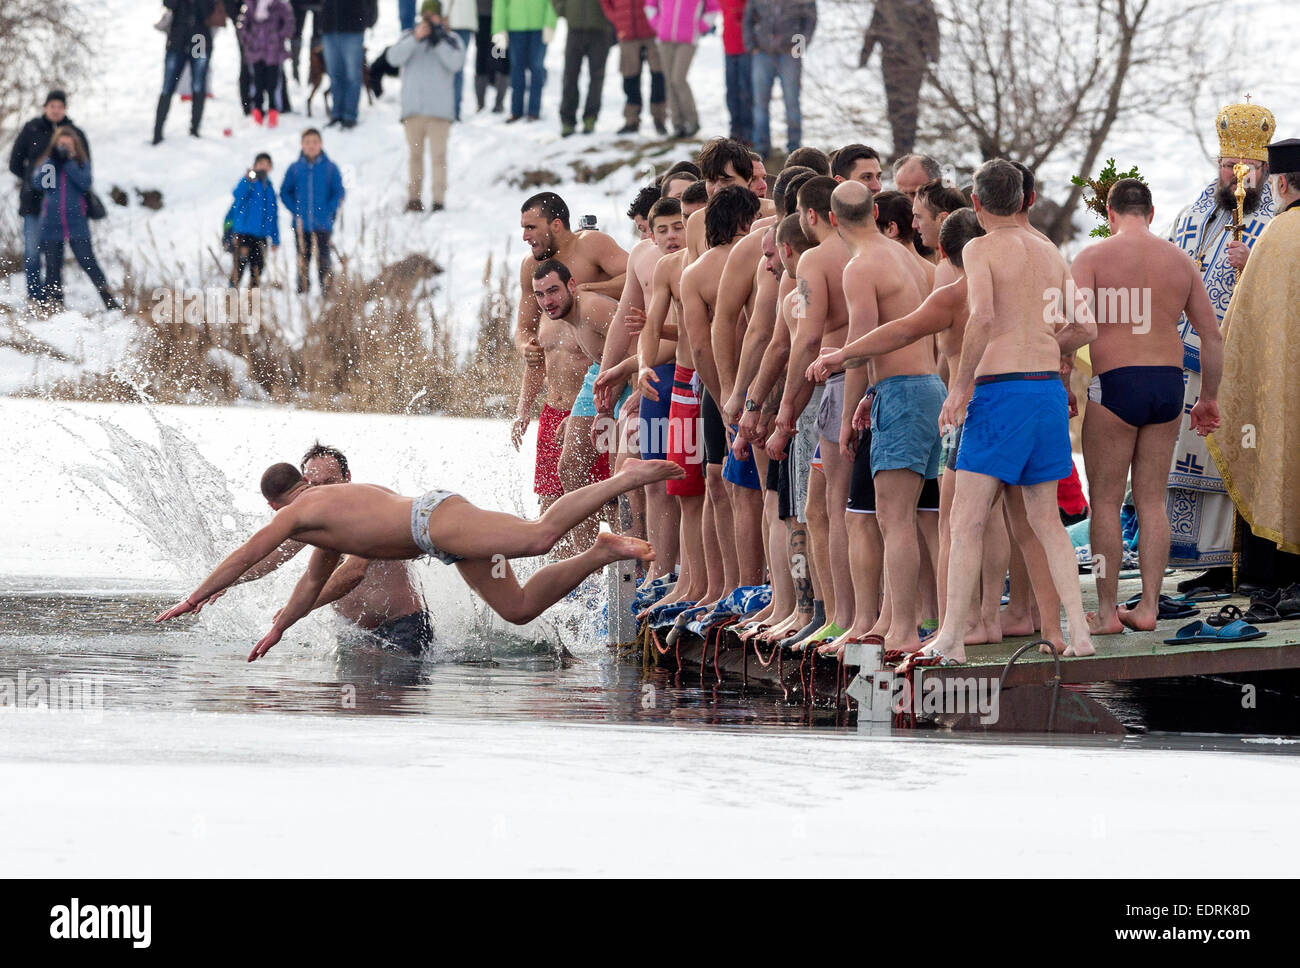 Sofia, Bulgaria - January 6, 2015: Men are jumping into a frozen lake waters for a wooden cross at Epiphany day celebration in B Stock Photo